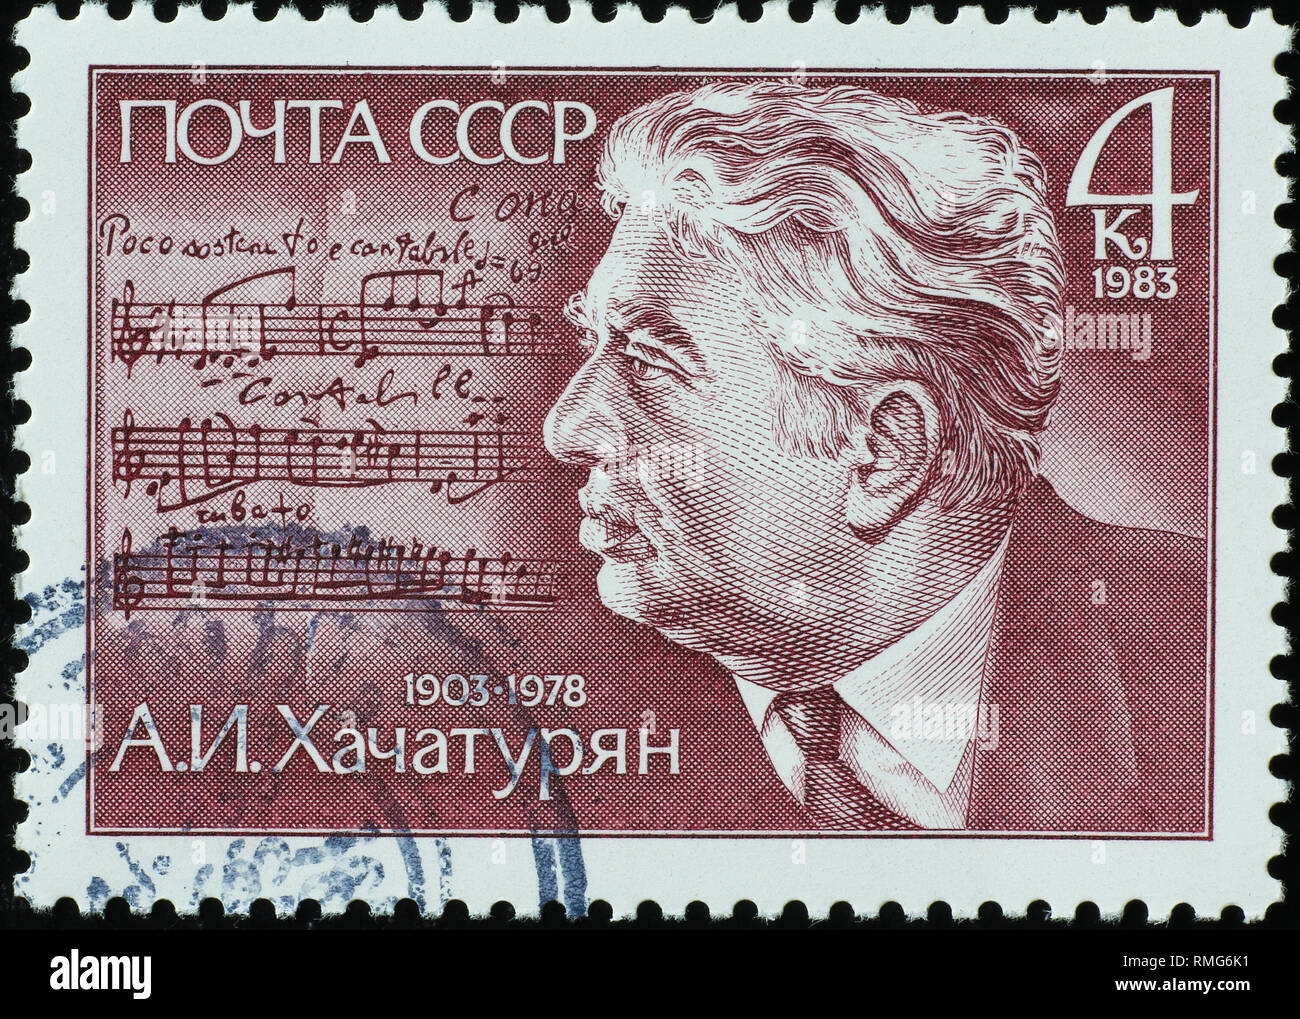 Composer Aram Khachaturian on russian Postage stamp Stock Photo